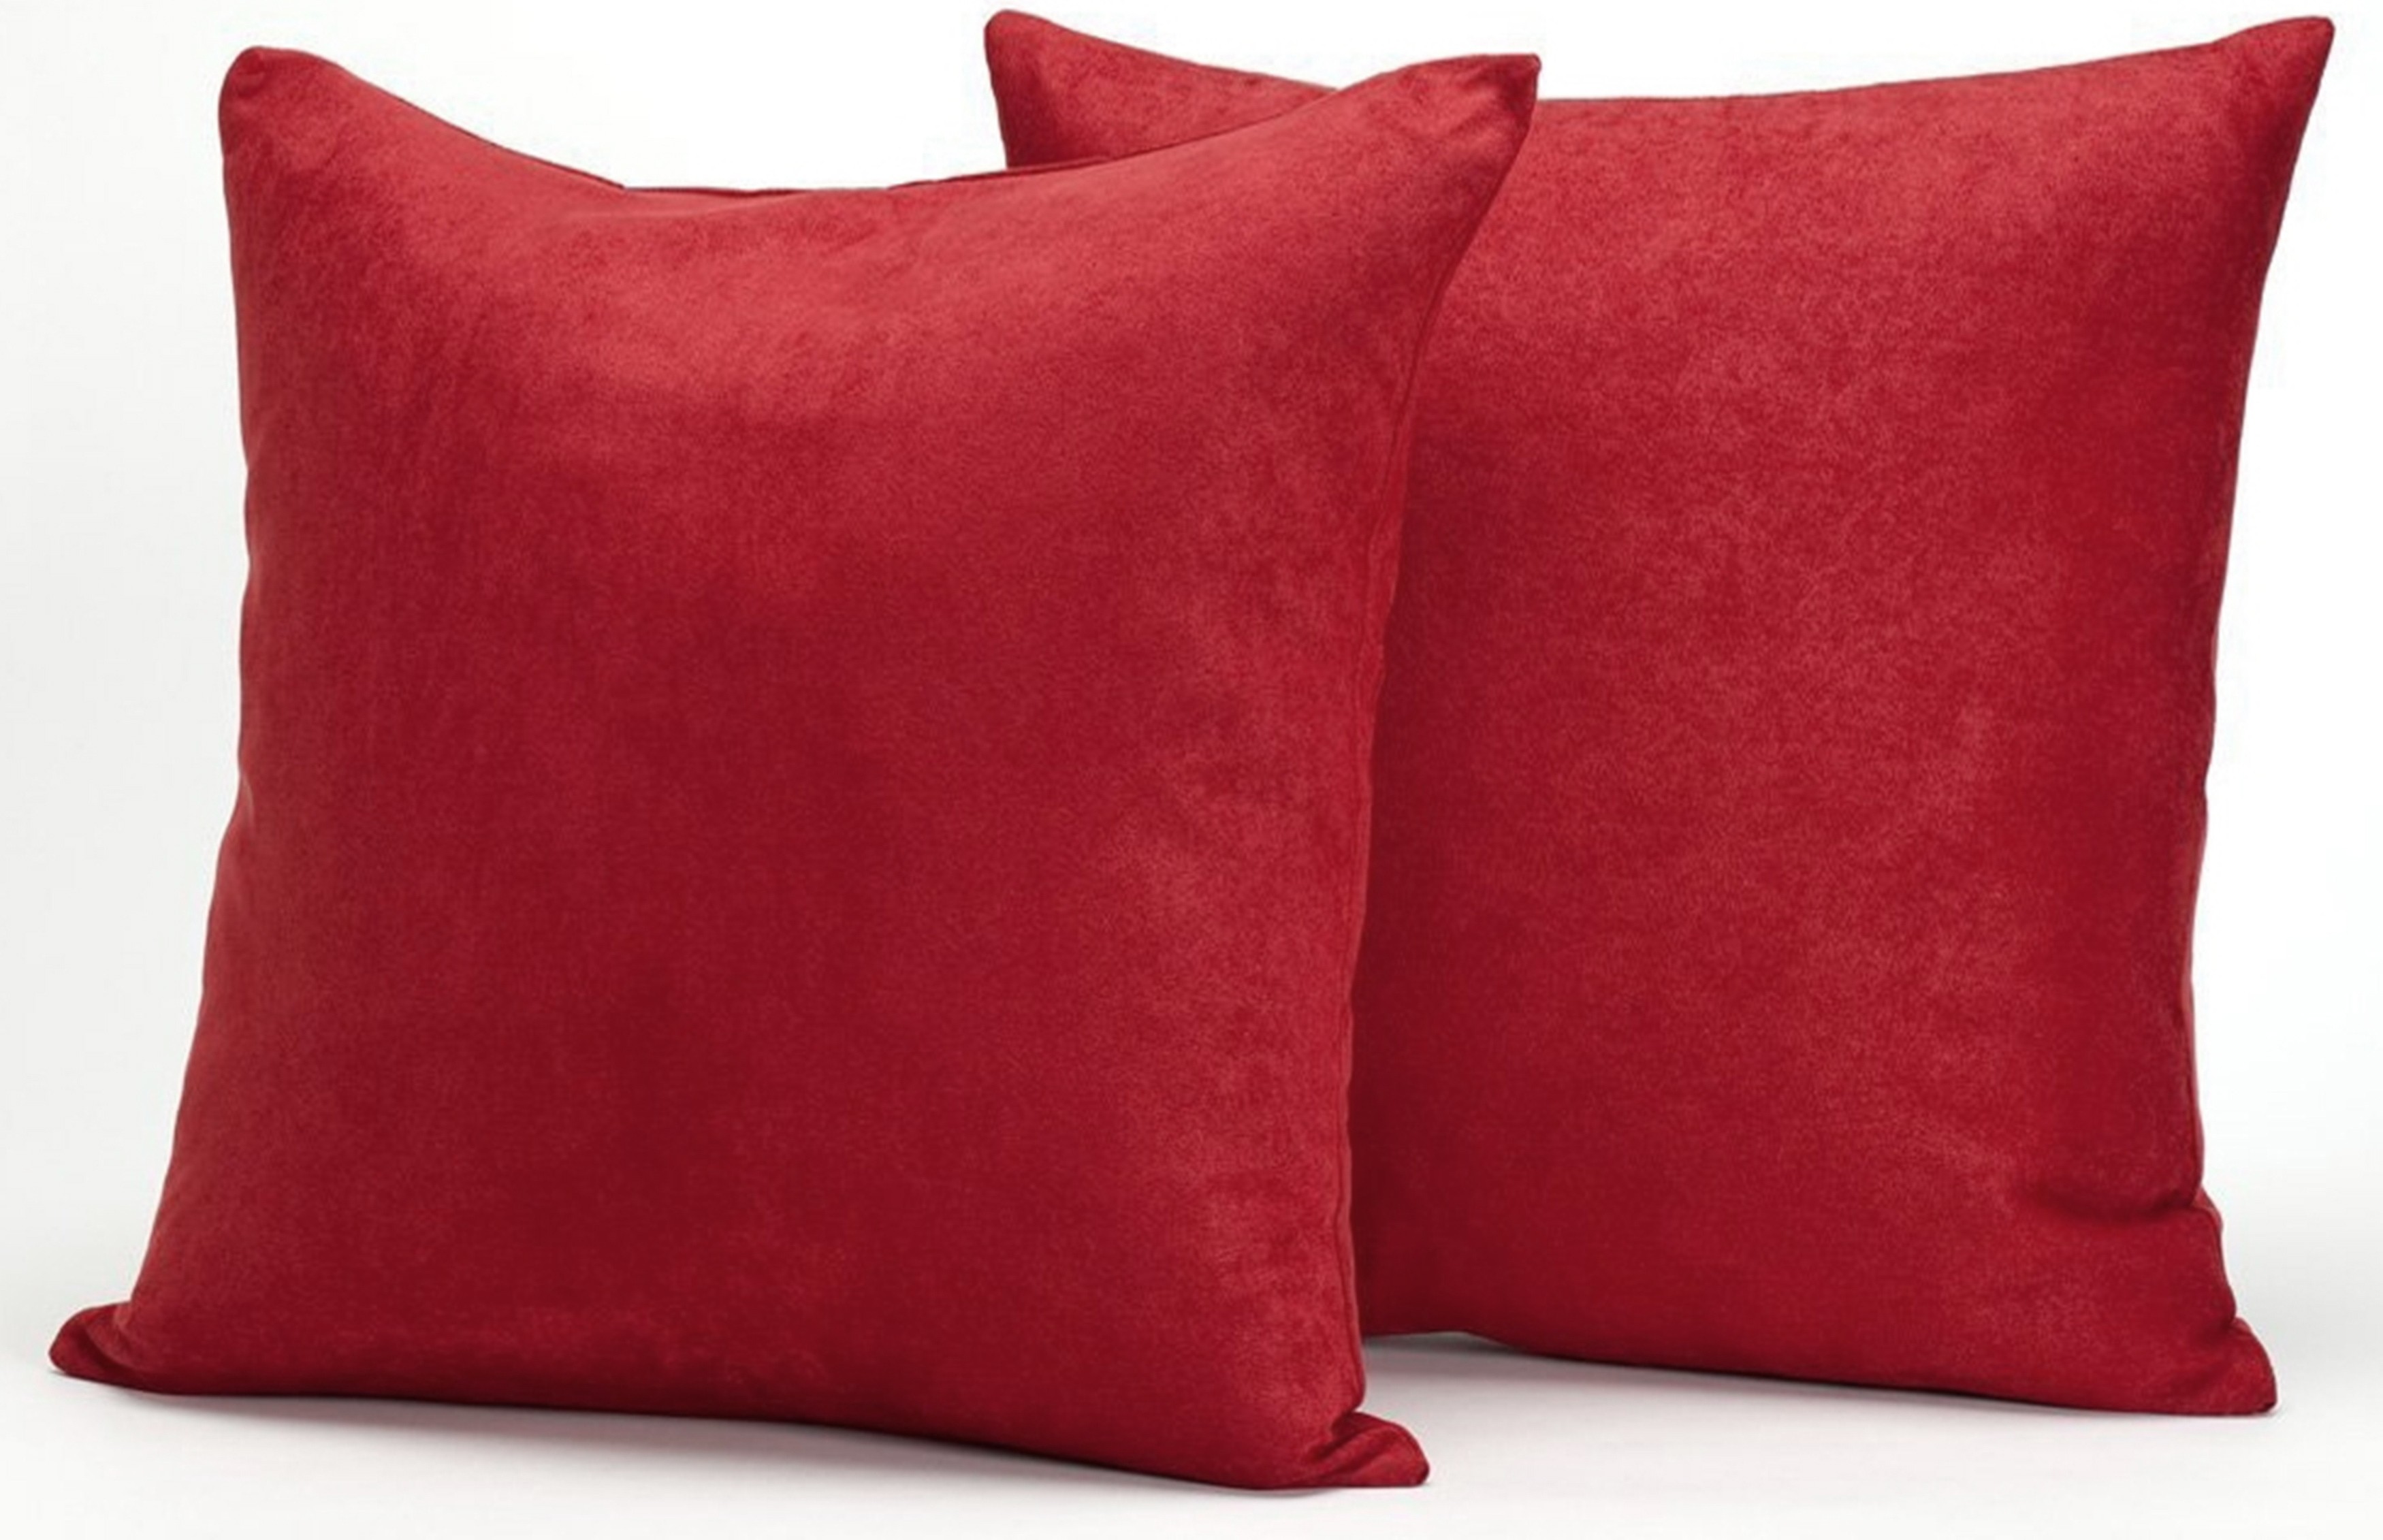 Deluxe Comfort Microsuede Throw Pillows, 18 x 18 - Down  Feather Filled - Decorative Colors - Soft Microsuede Cover - Throw Pillow,  Red - Pack of 2